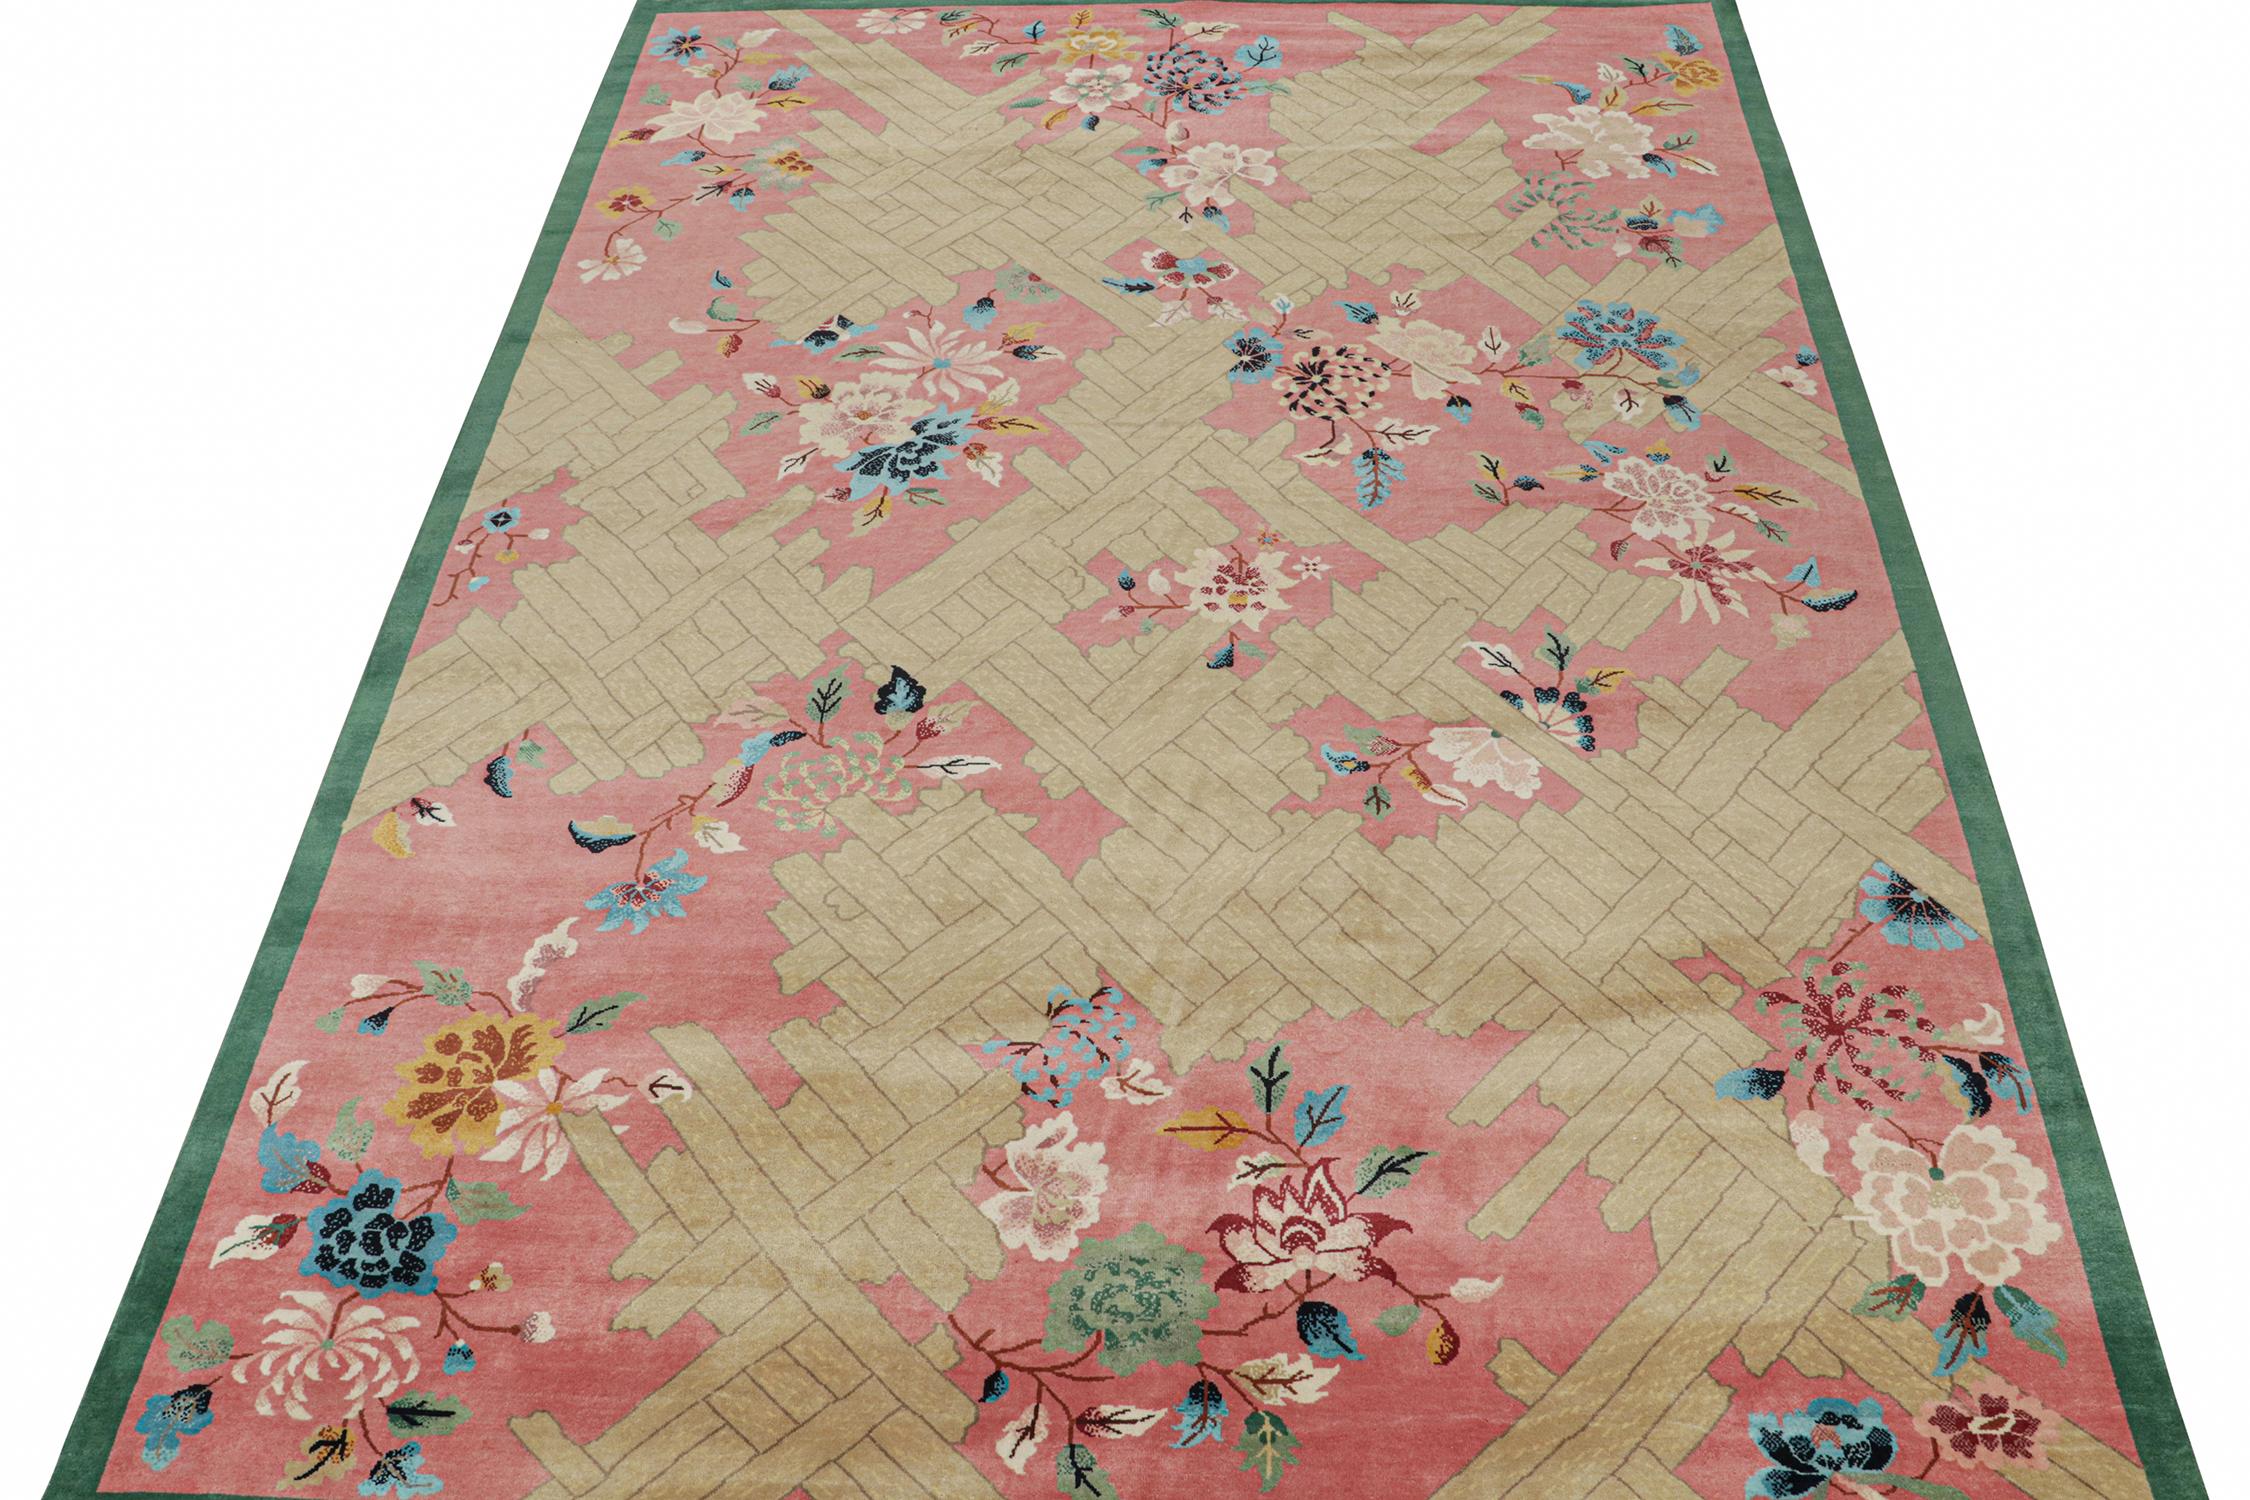 This 10x14 ode to Chinese Art Deco rugs is the next addition to Rug & Kilim's inspired new Deco Collection. 

Further On the Design:

The piece enjoys an emphasis on pink and beige in a play of finely detailed florals and geometric patterns.